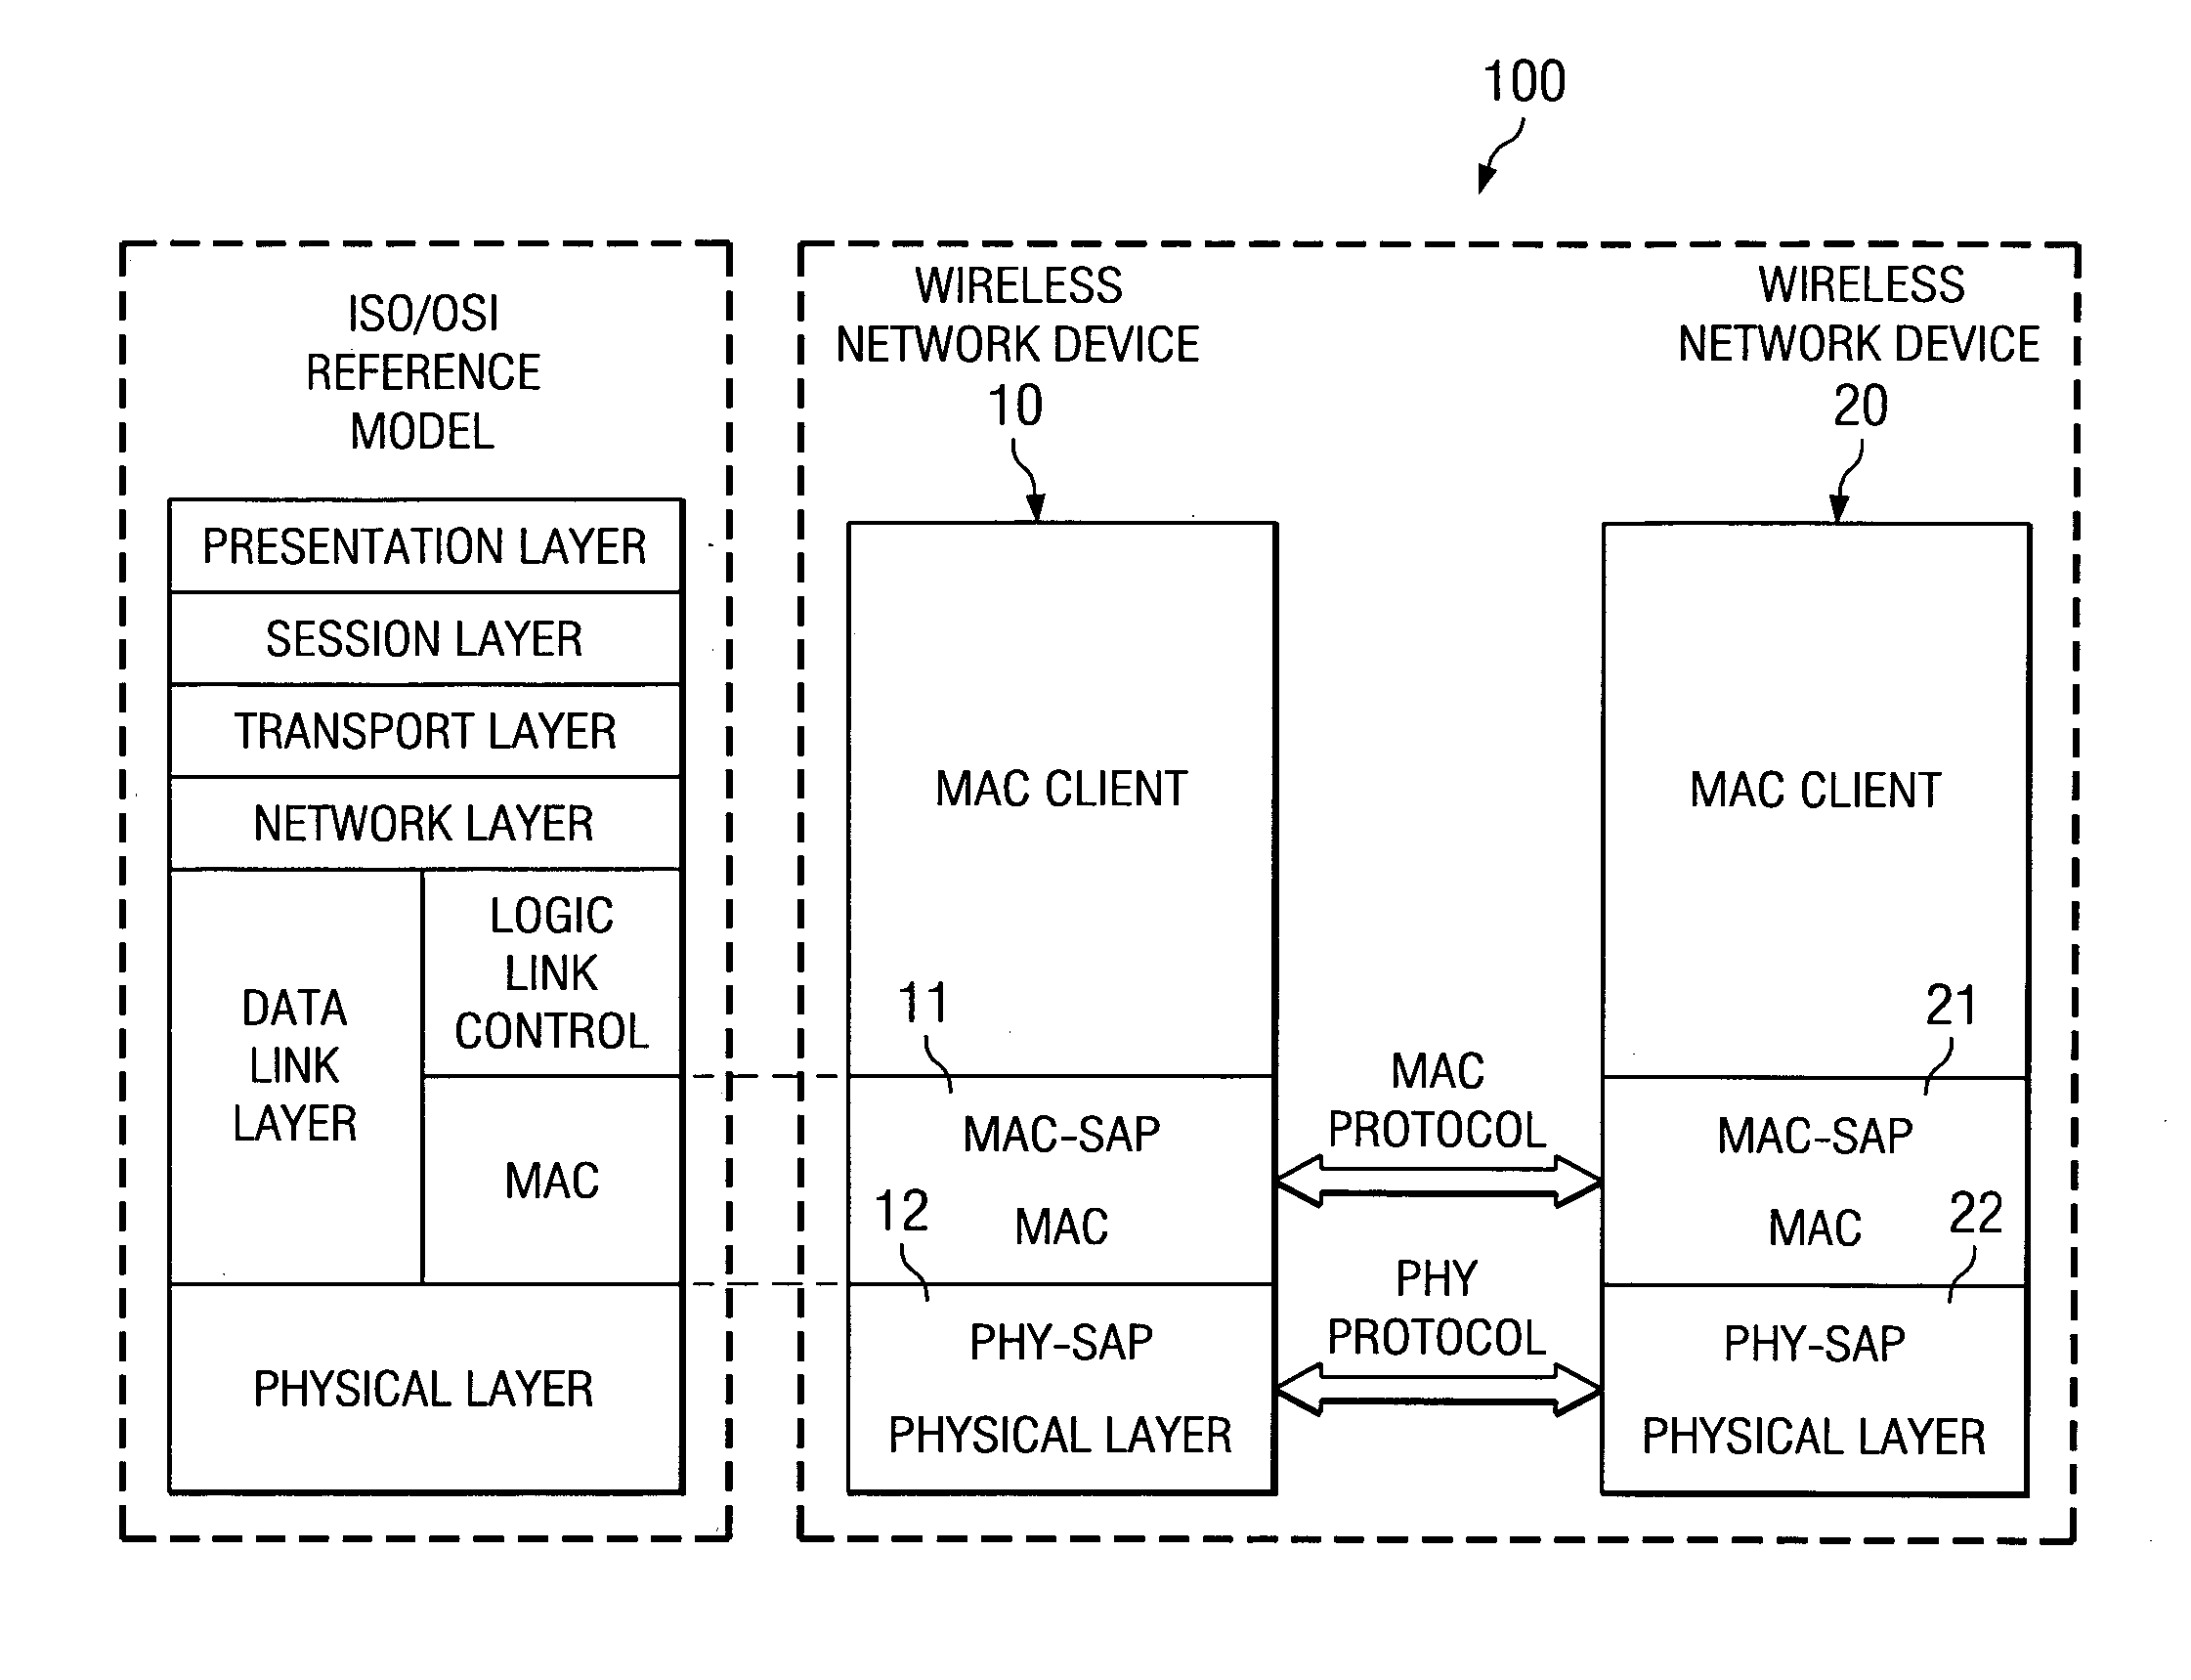 System and method for establishing secure communications between devices in distributed wireless networks